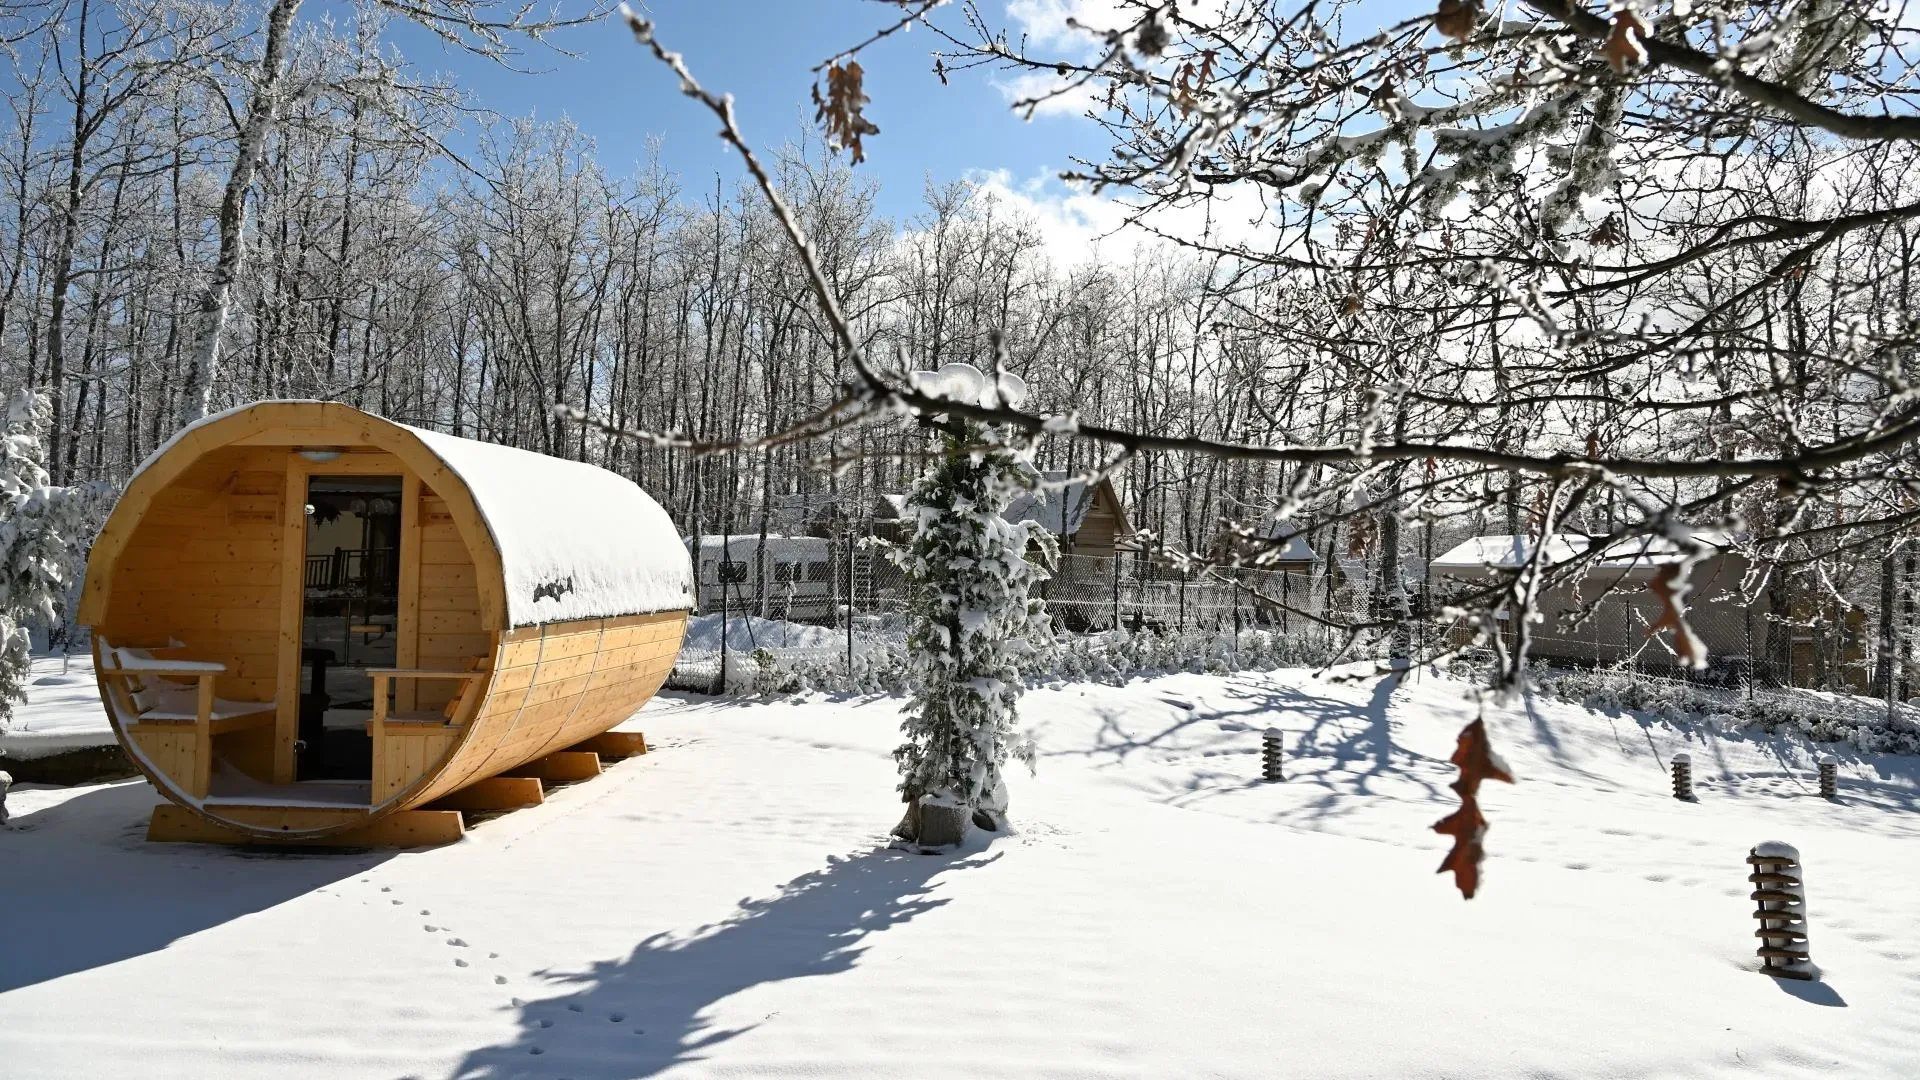 The magic of Glamping in winter